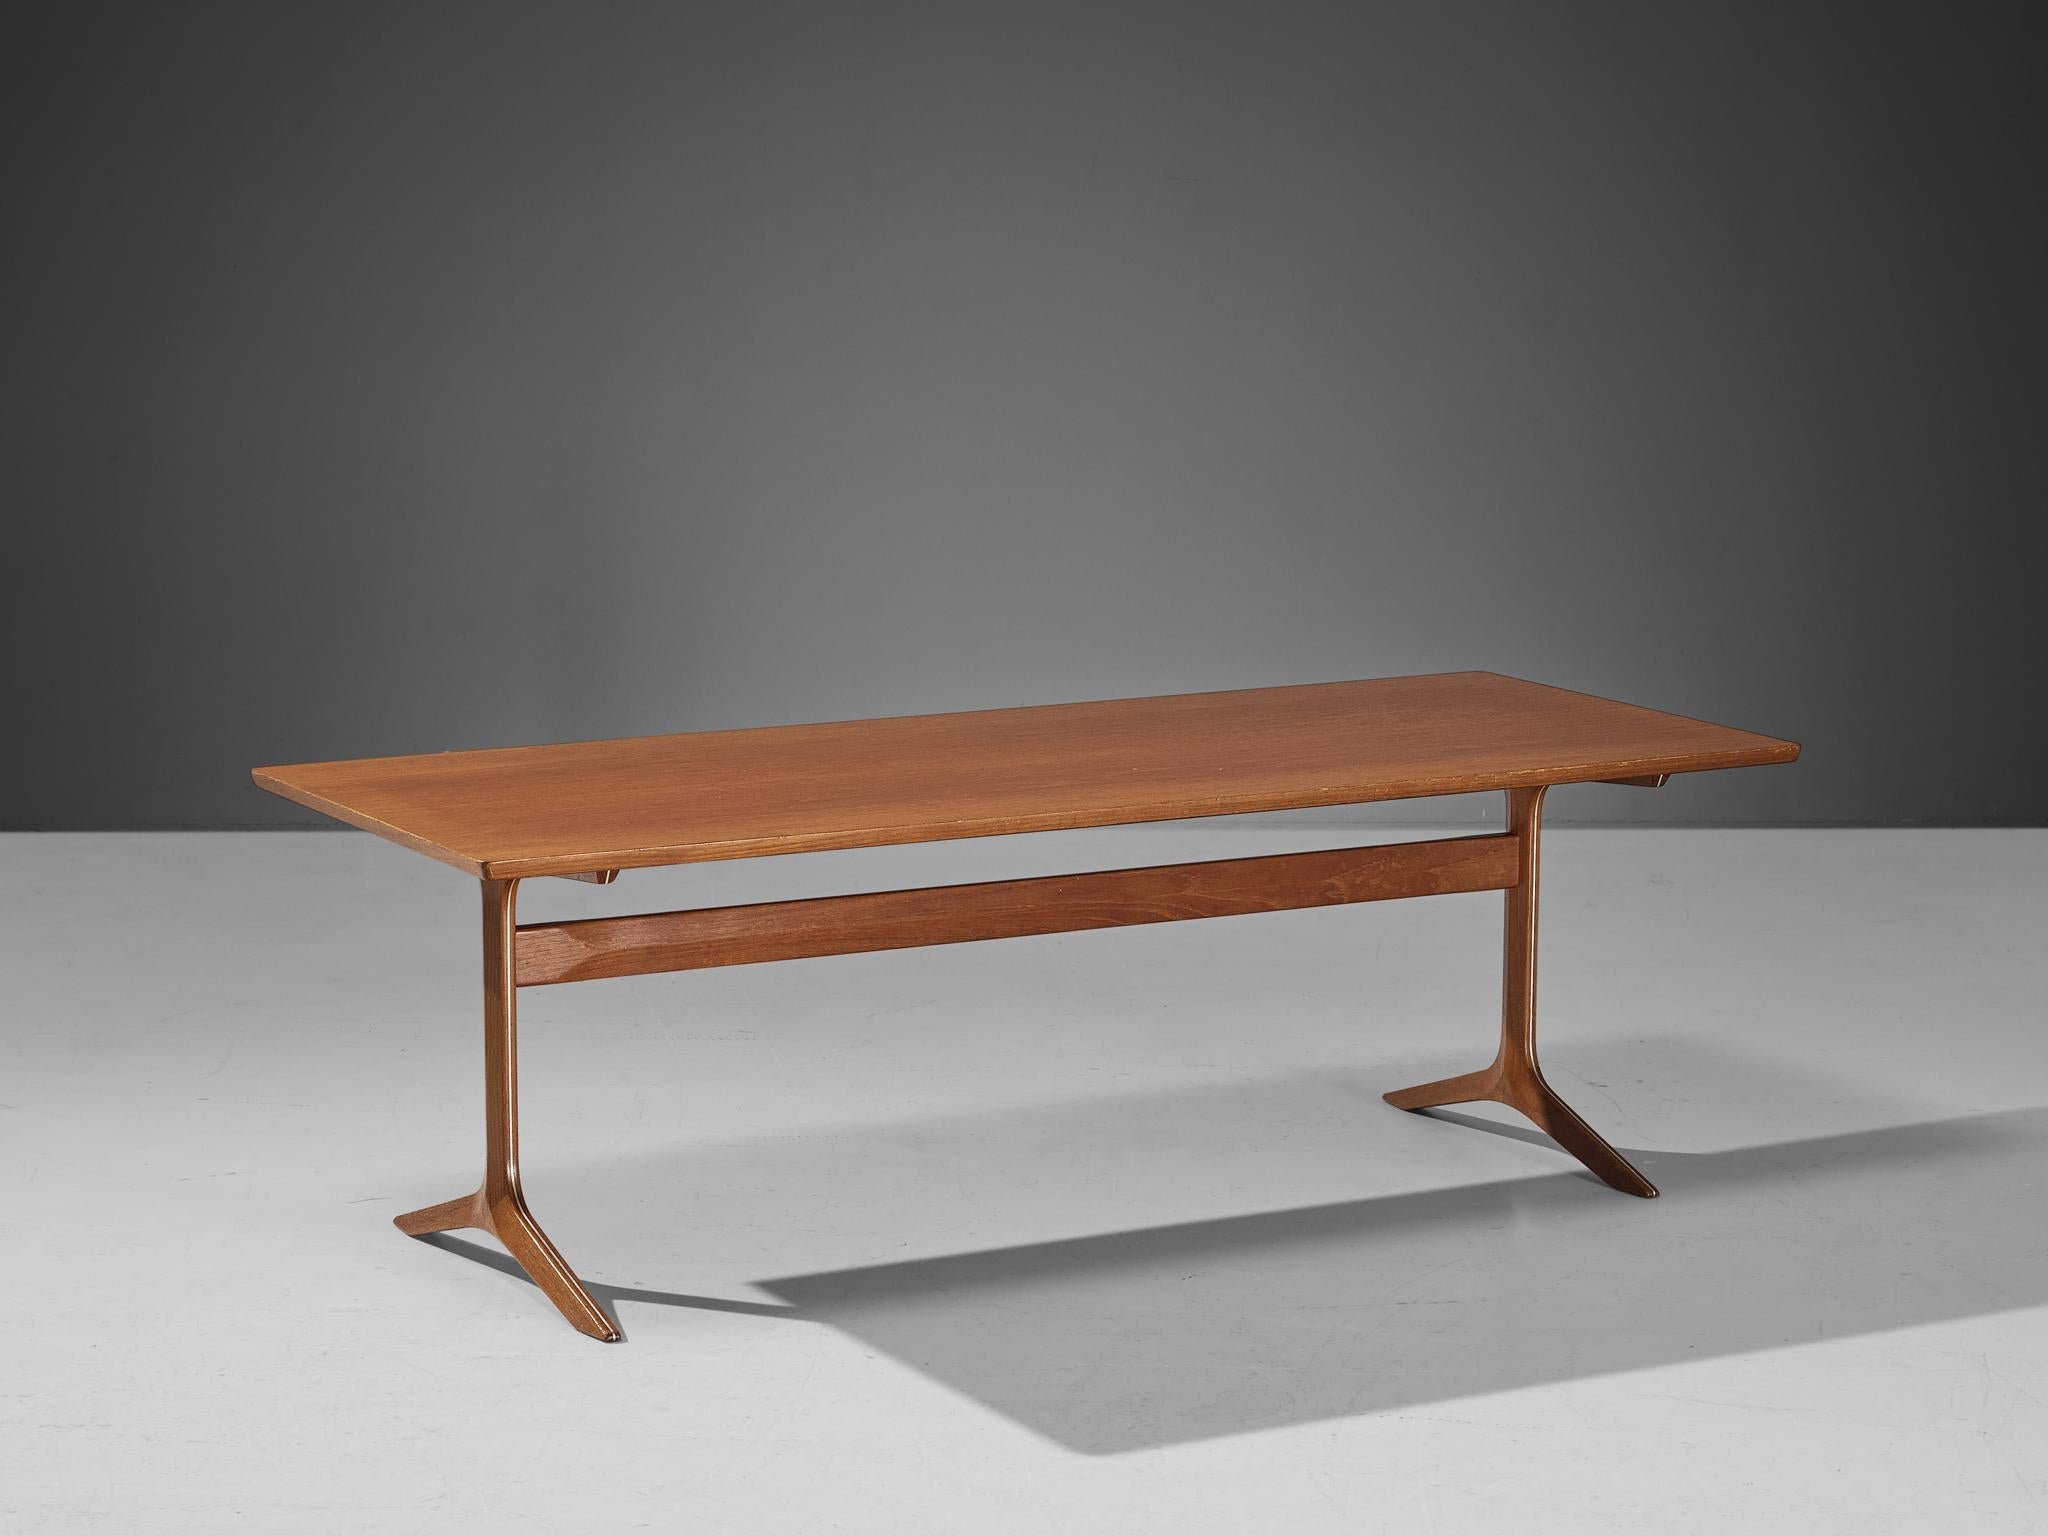 Peter Hvidt & Orla Mølgaard-Nielsen for France & Søn, coffee table, teak, Denmark, 1950s. 

This elegant teak wooden coffee table is created by the Danish designers Peter Hvidt and Orla Mølgaard-Nielsen. It holds the quintessential essence of Danish